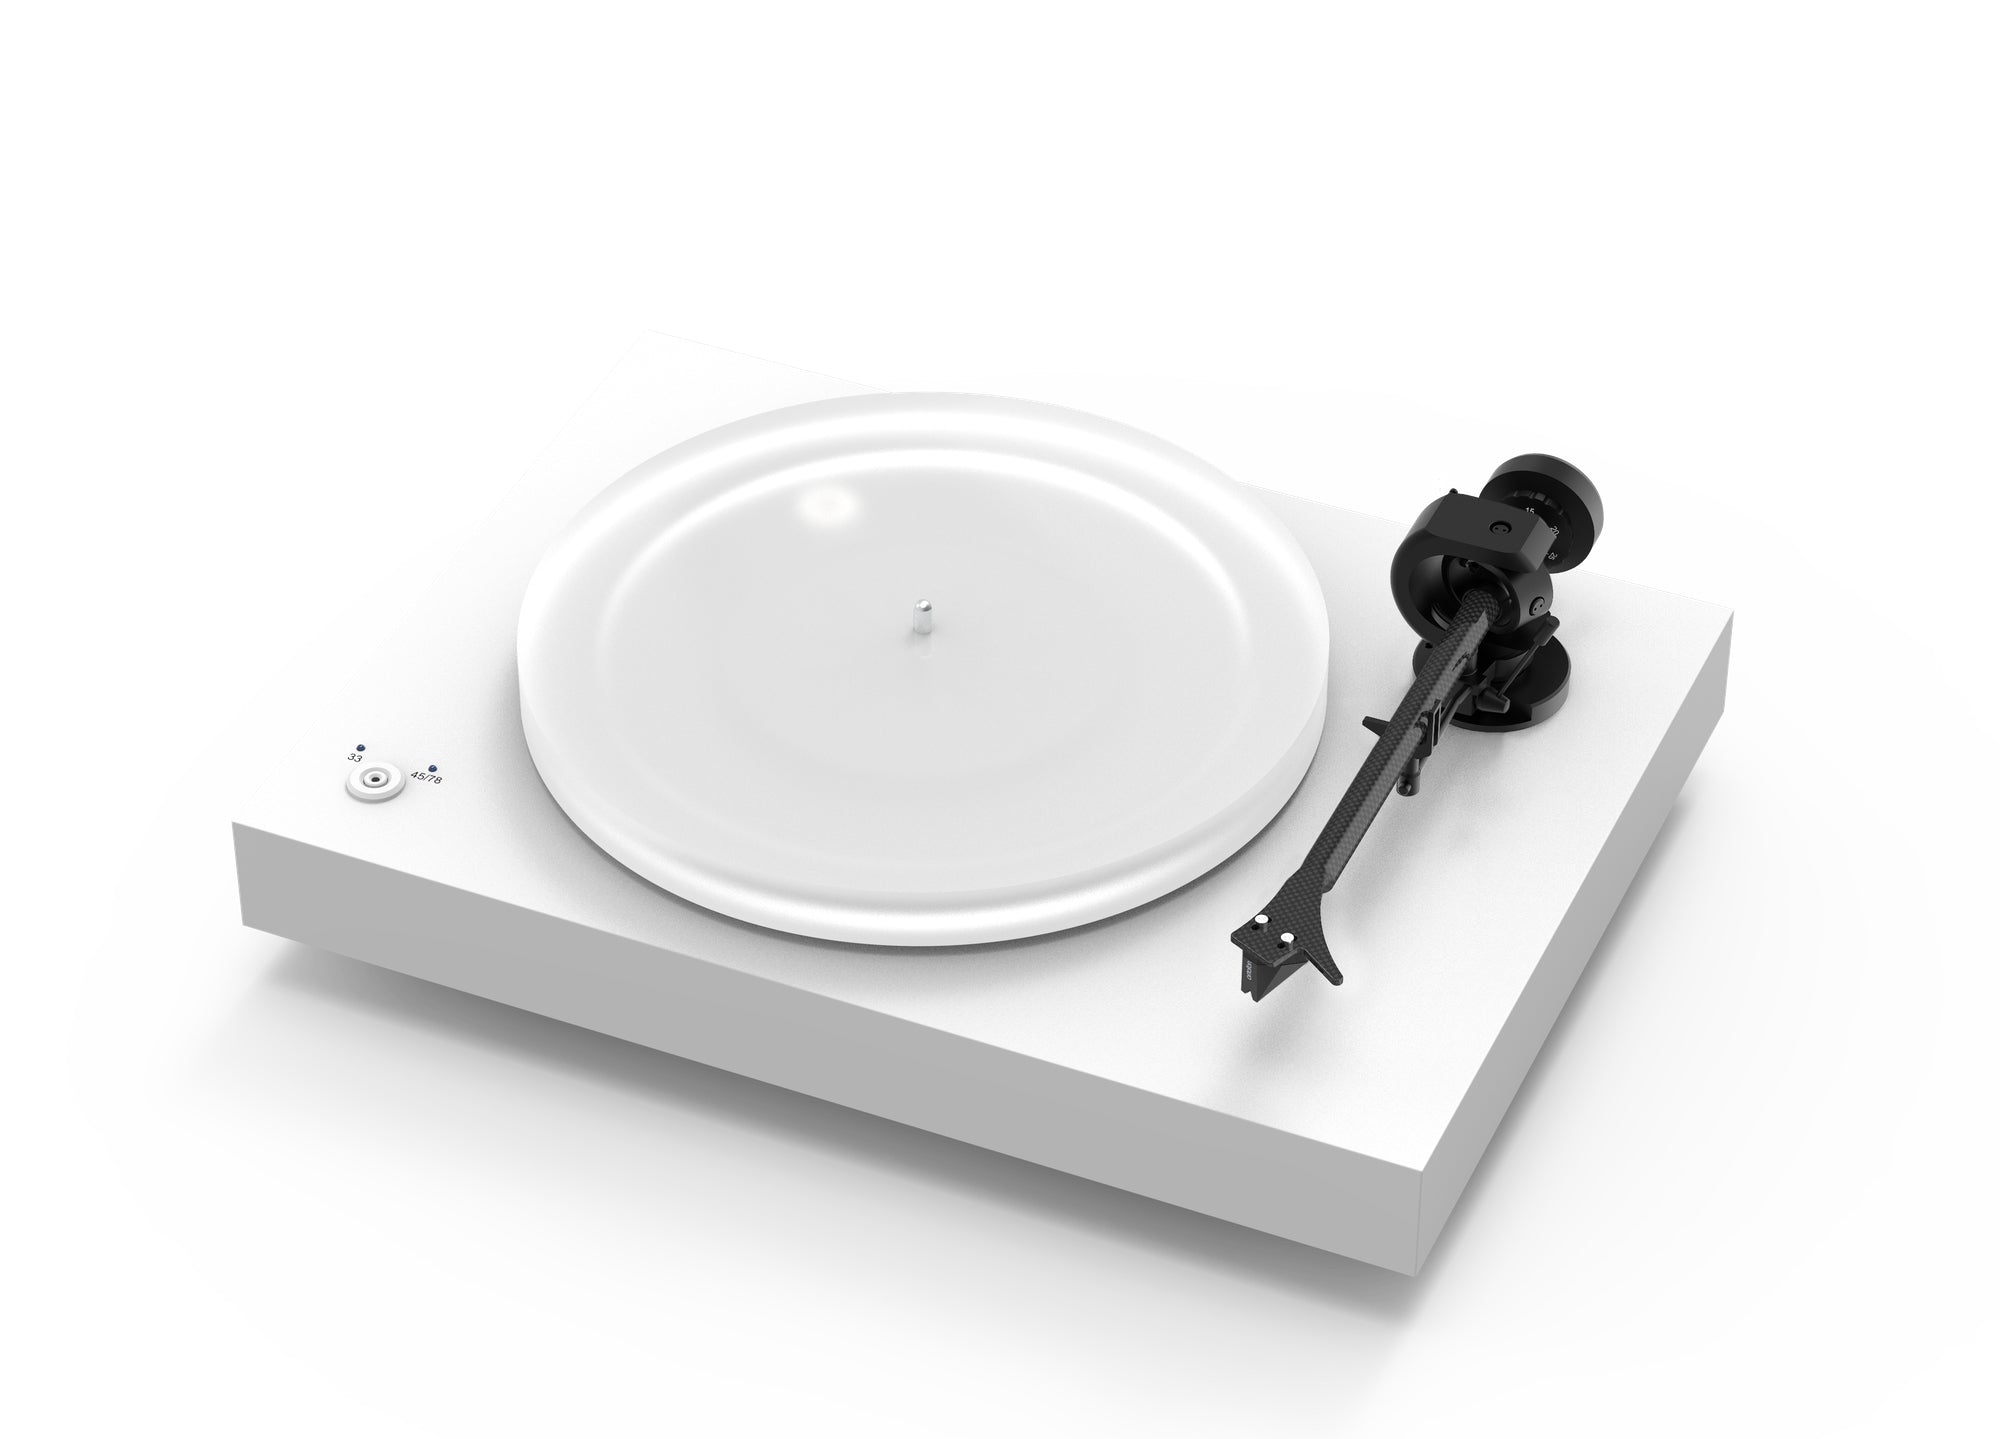 PRO-JECT X2 TURNTABLE WITH ORTOFON 2M BLUE CARTRIDGE PRE-FITTED